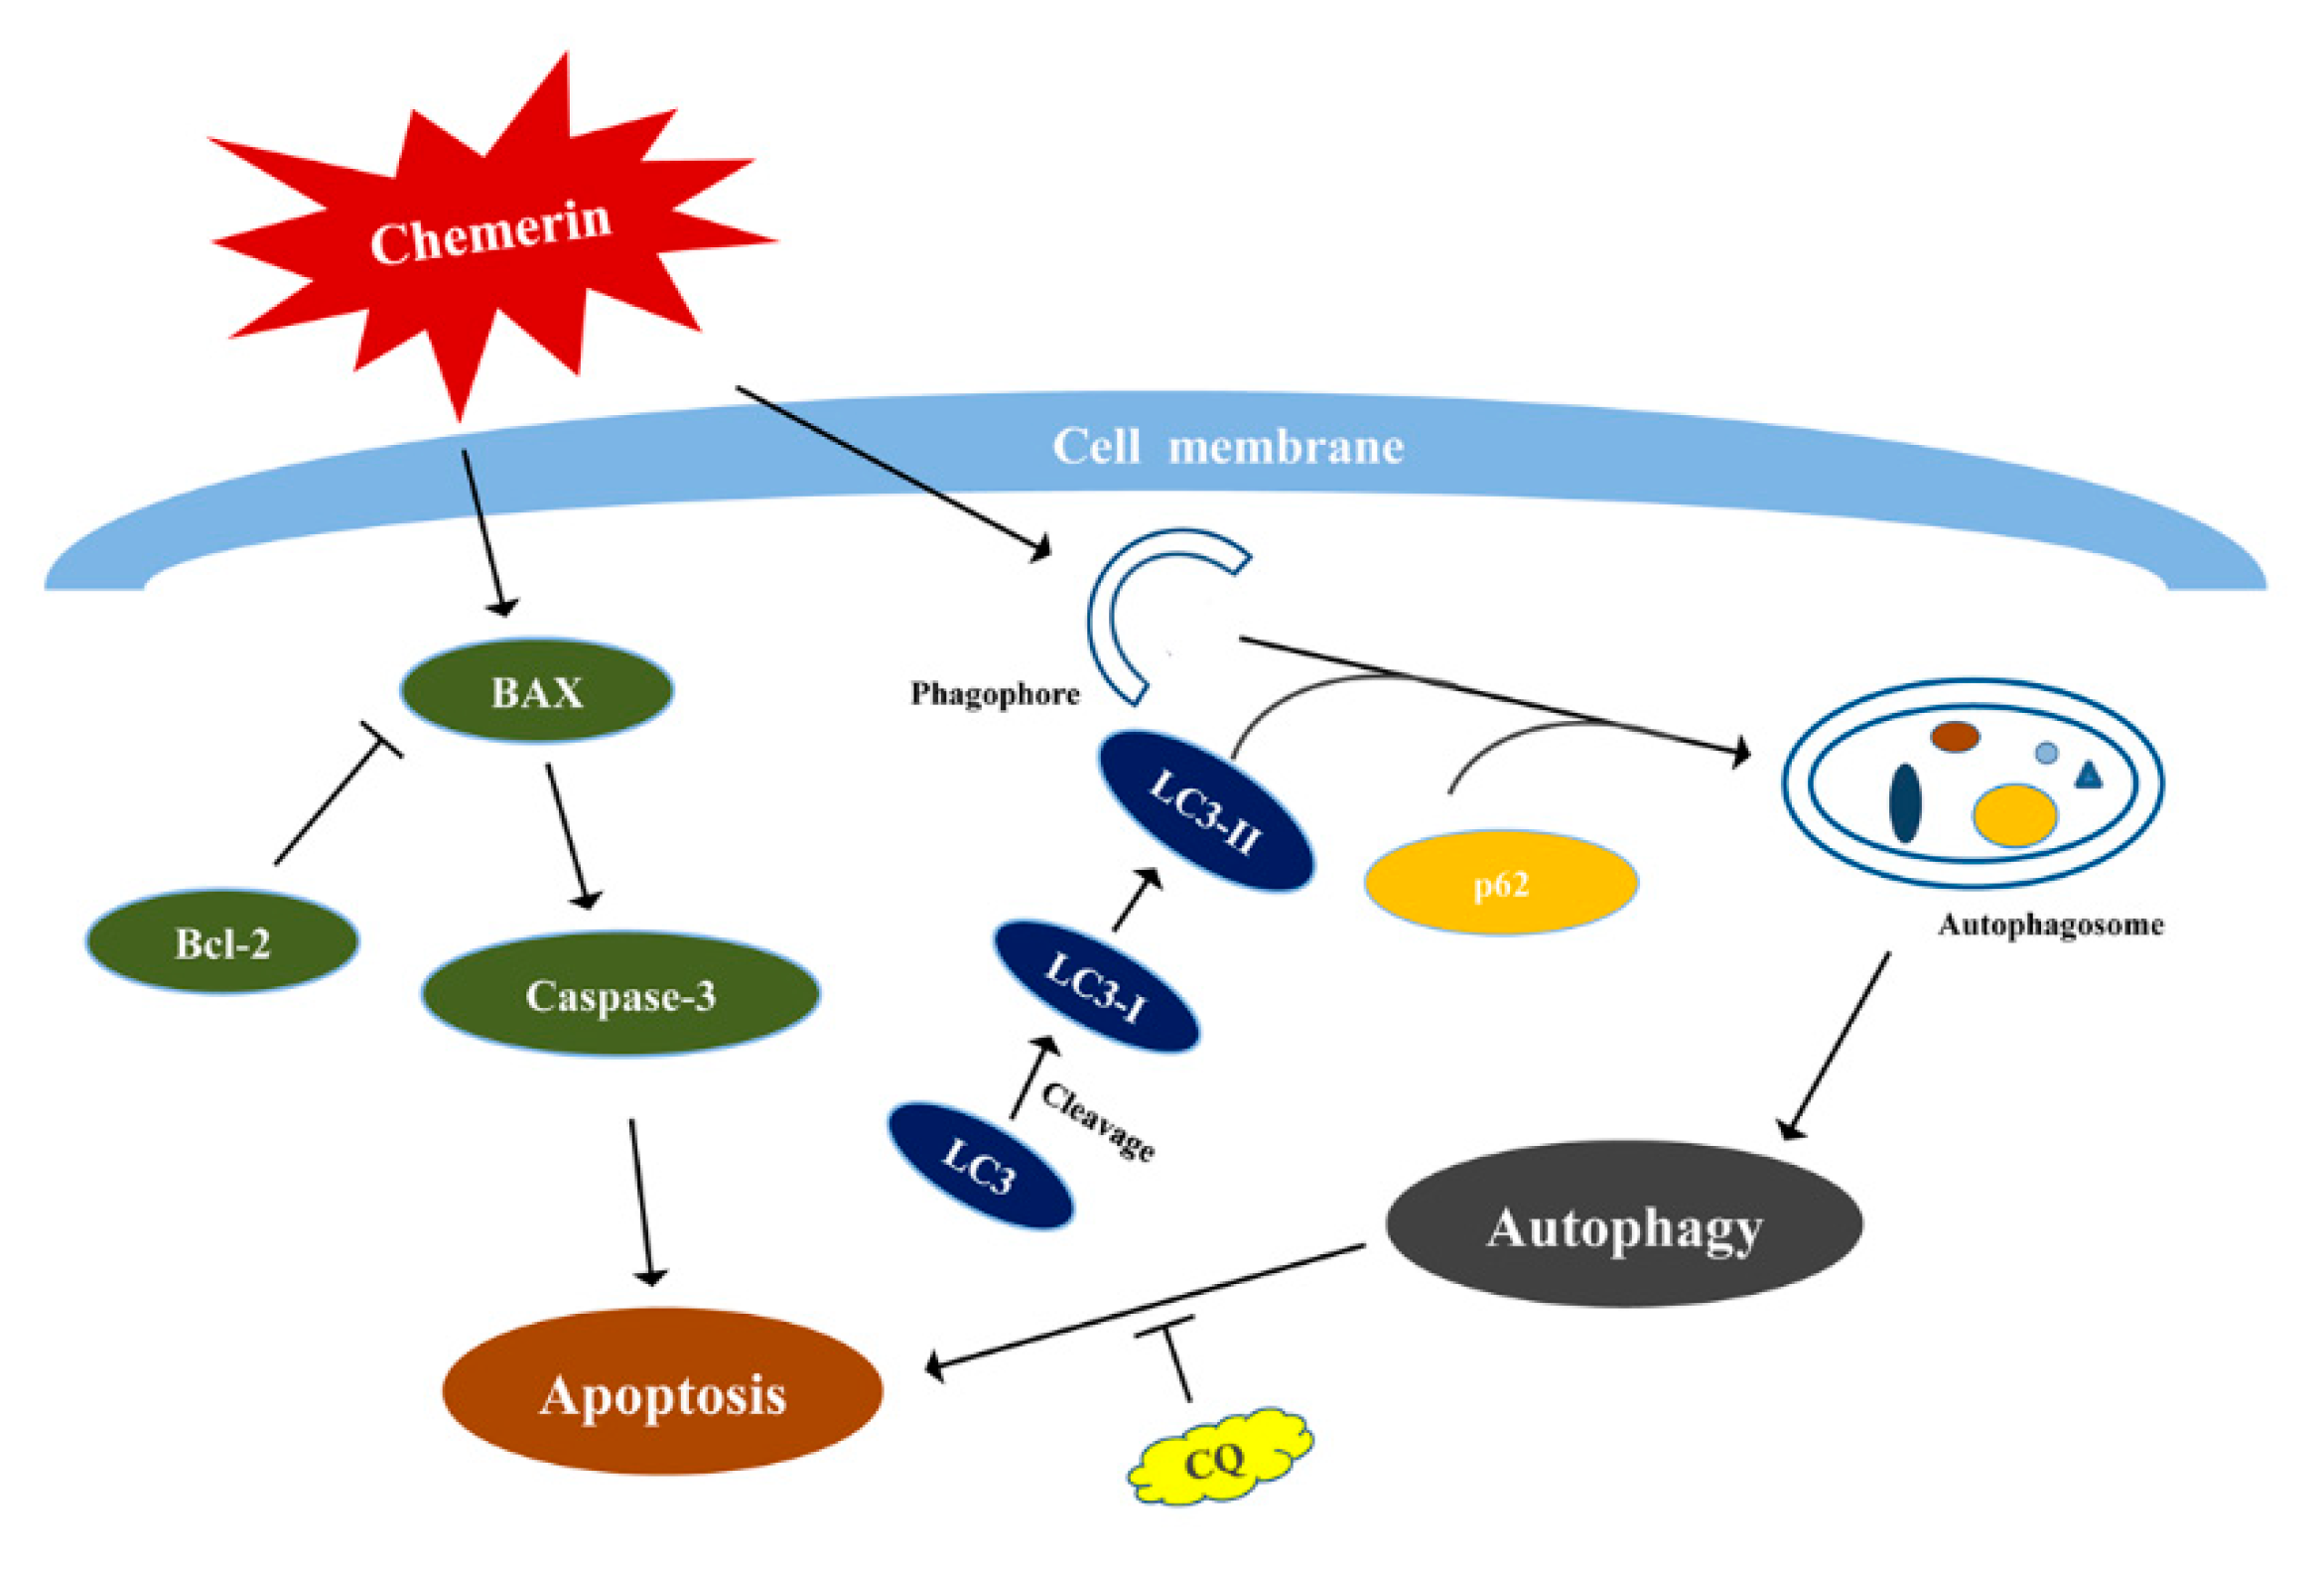 chaperone proteins in mad cow disease